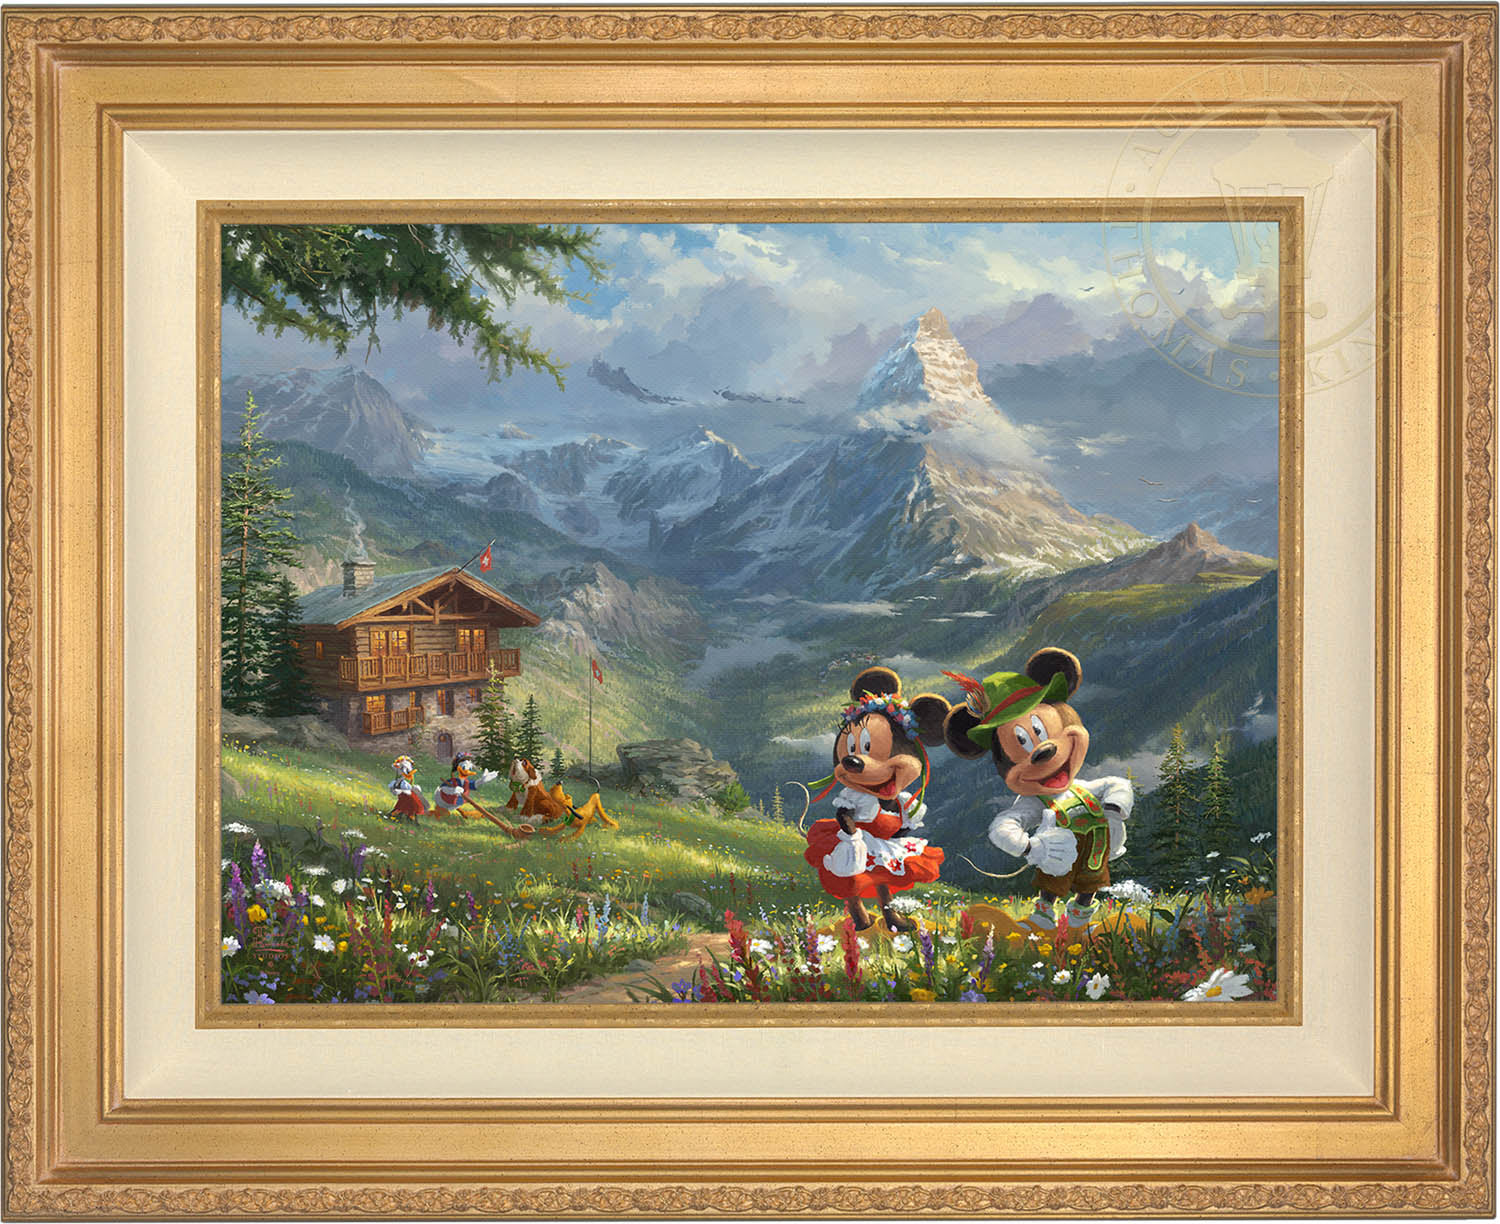 Mickey, Minnie, and Daisy dressed in the traditional Swiss attire, at a distance near the log cabin Donald, Daisy and Pluto have found a new friend. Antique Gold Frame